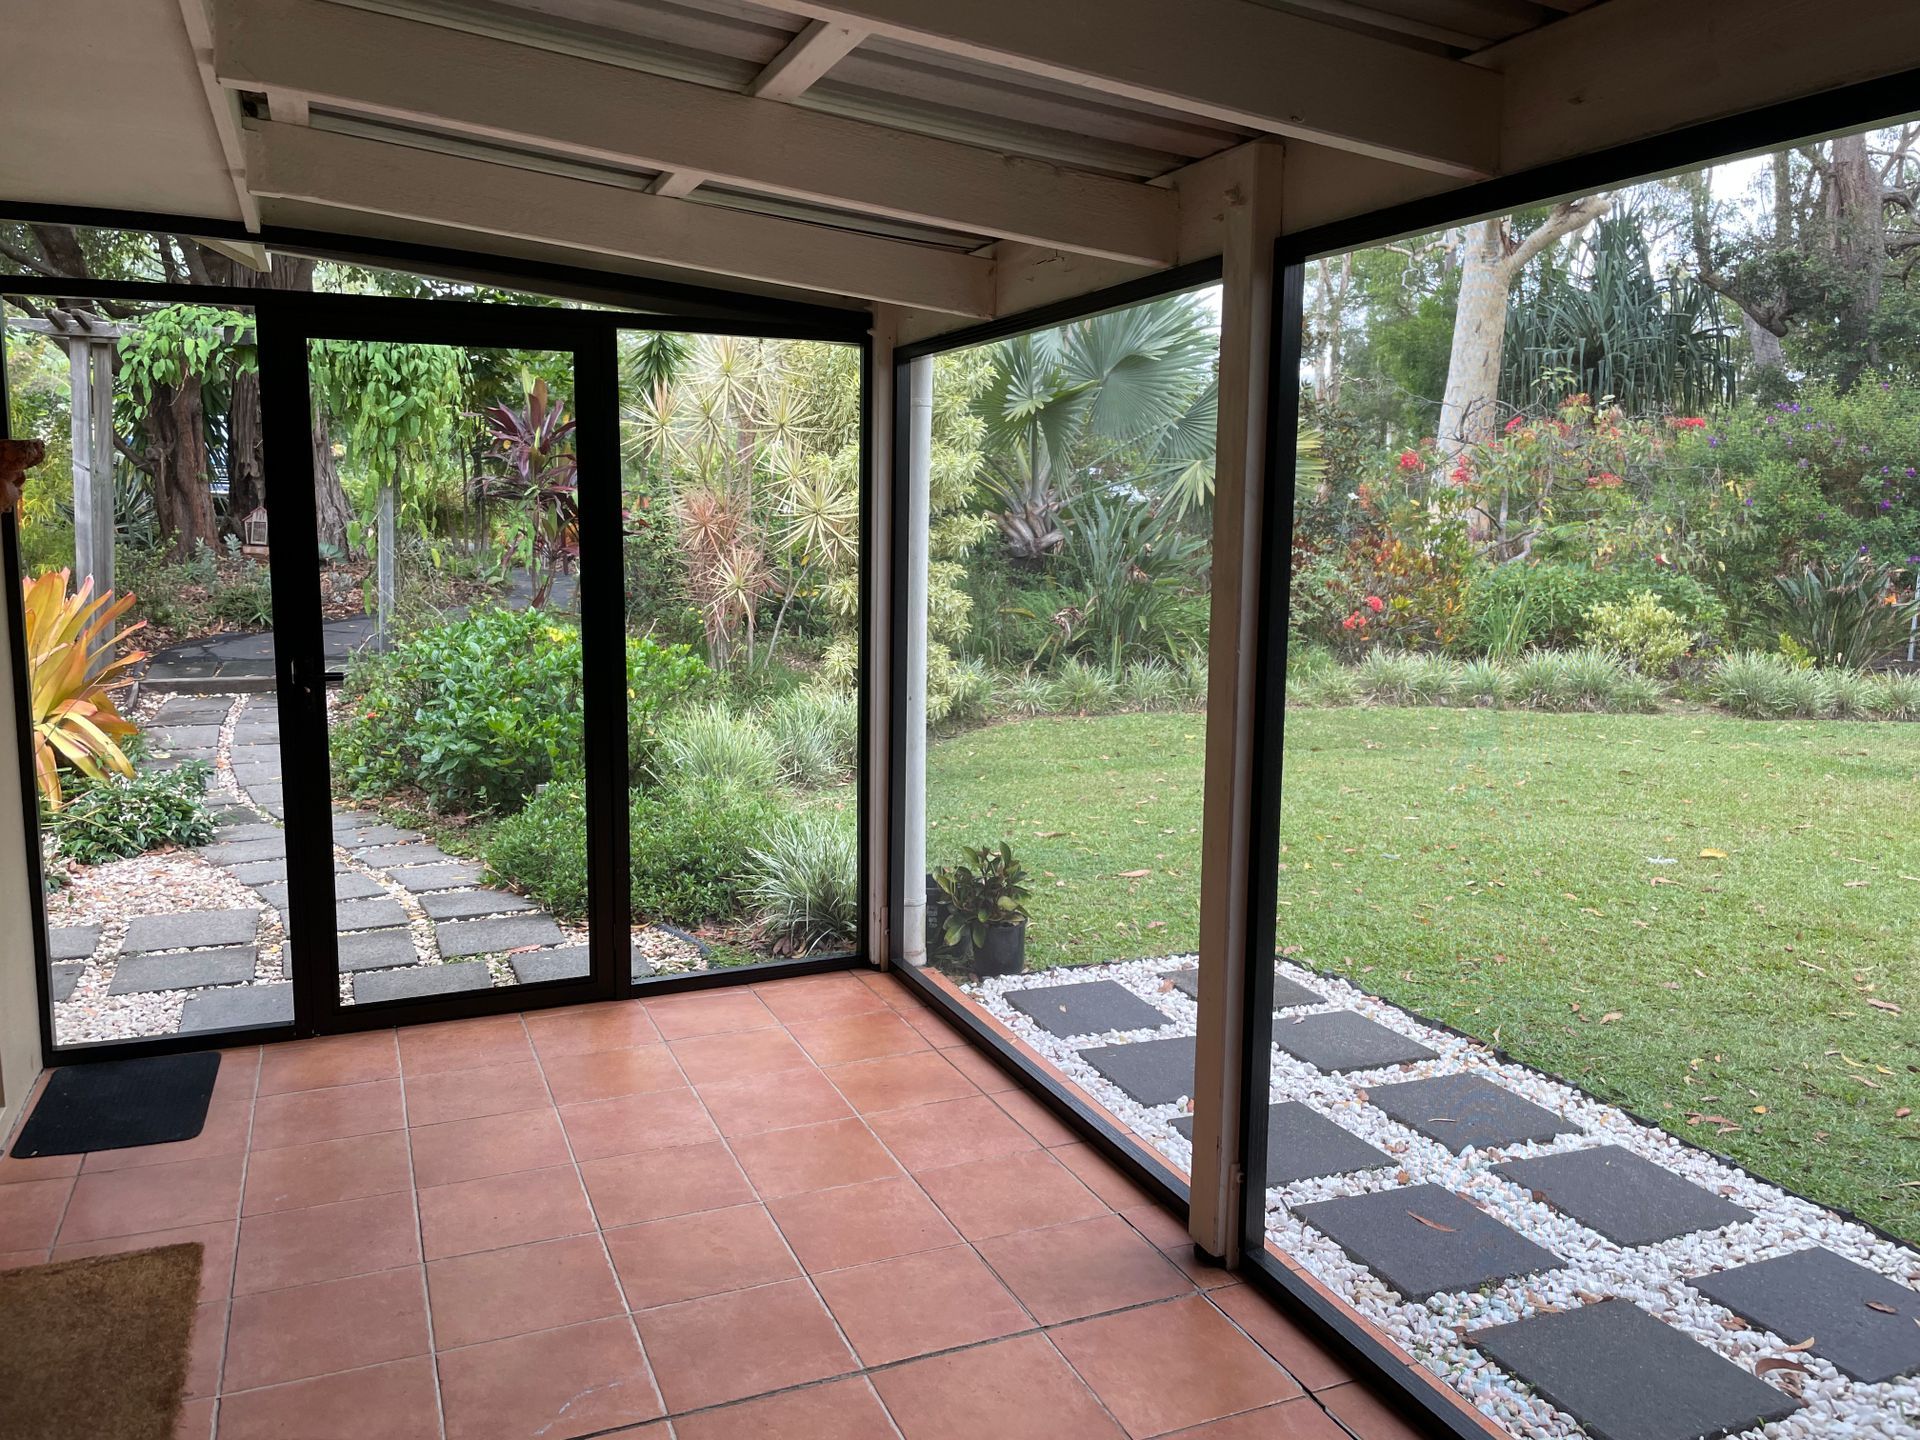 An image of a back patio of a house enclosed with insect screens and grass backyard in the background